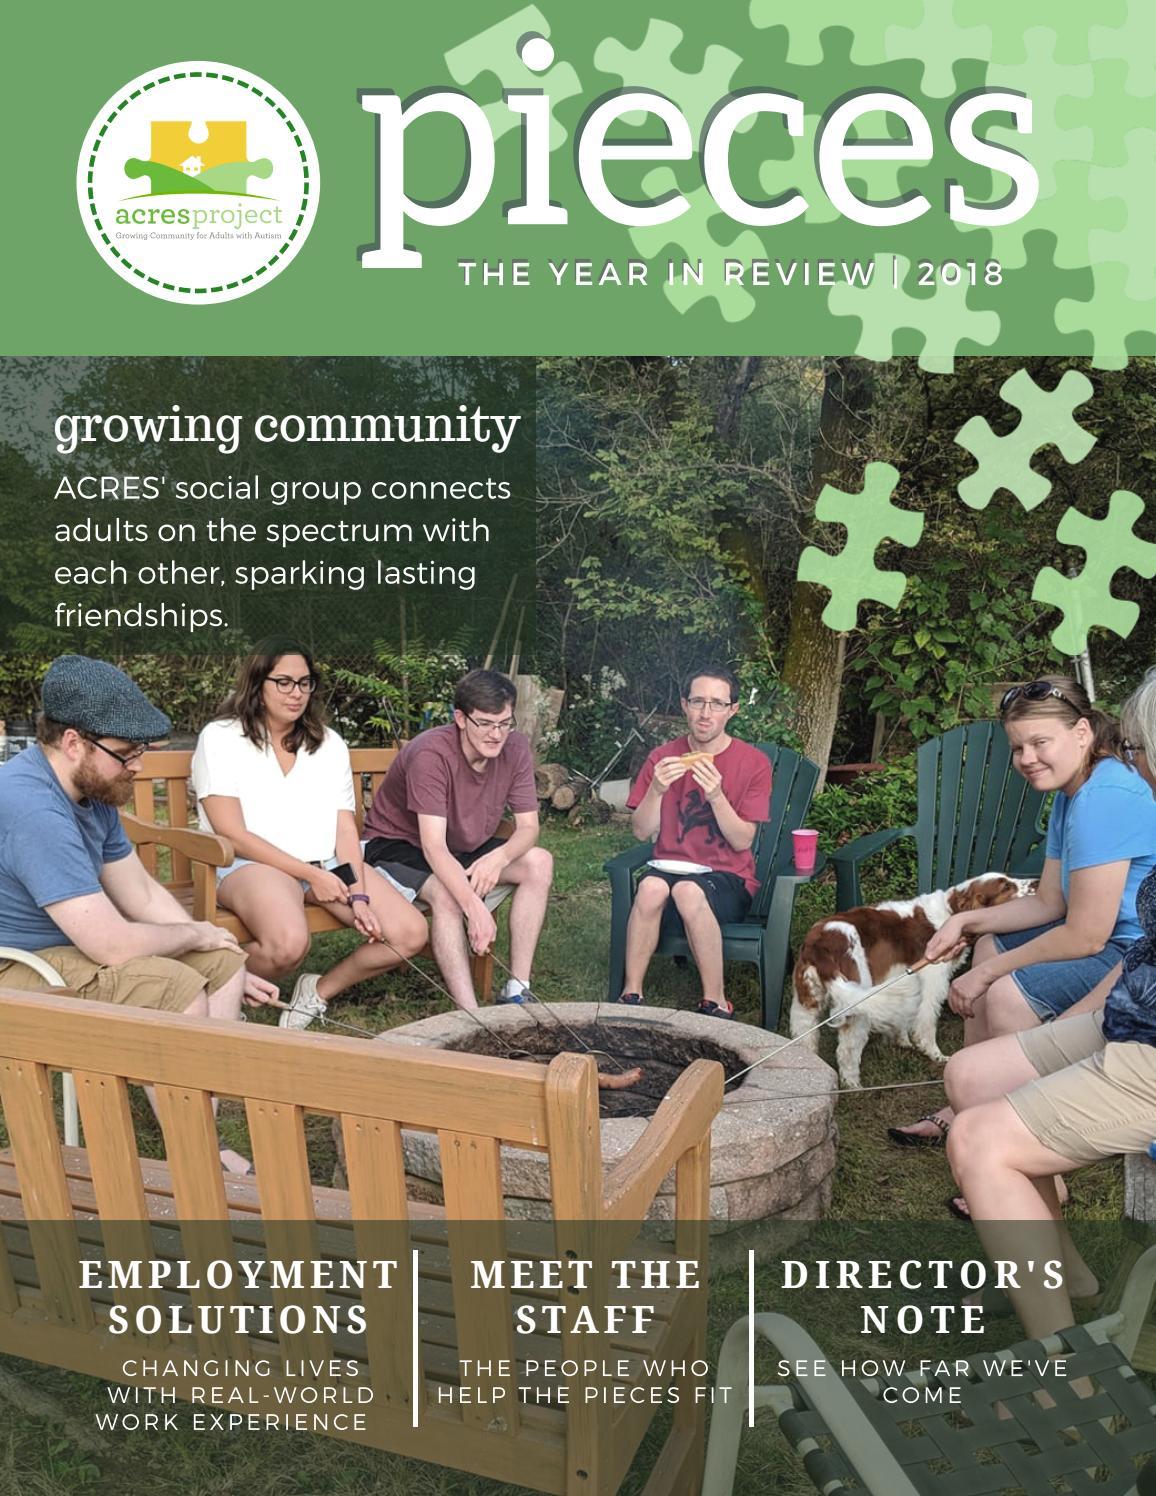 2018 has been a great year for The ACRES Project! Flip through our first ever issue of Pieces, our digital magazine, to see what we've accomplished to